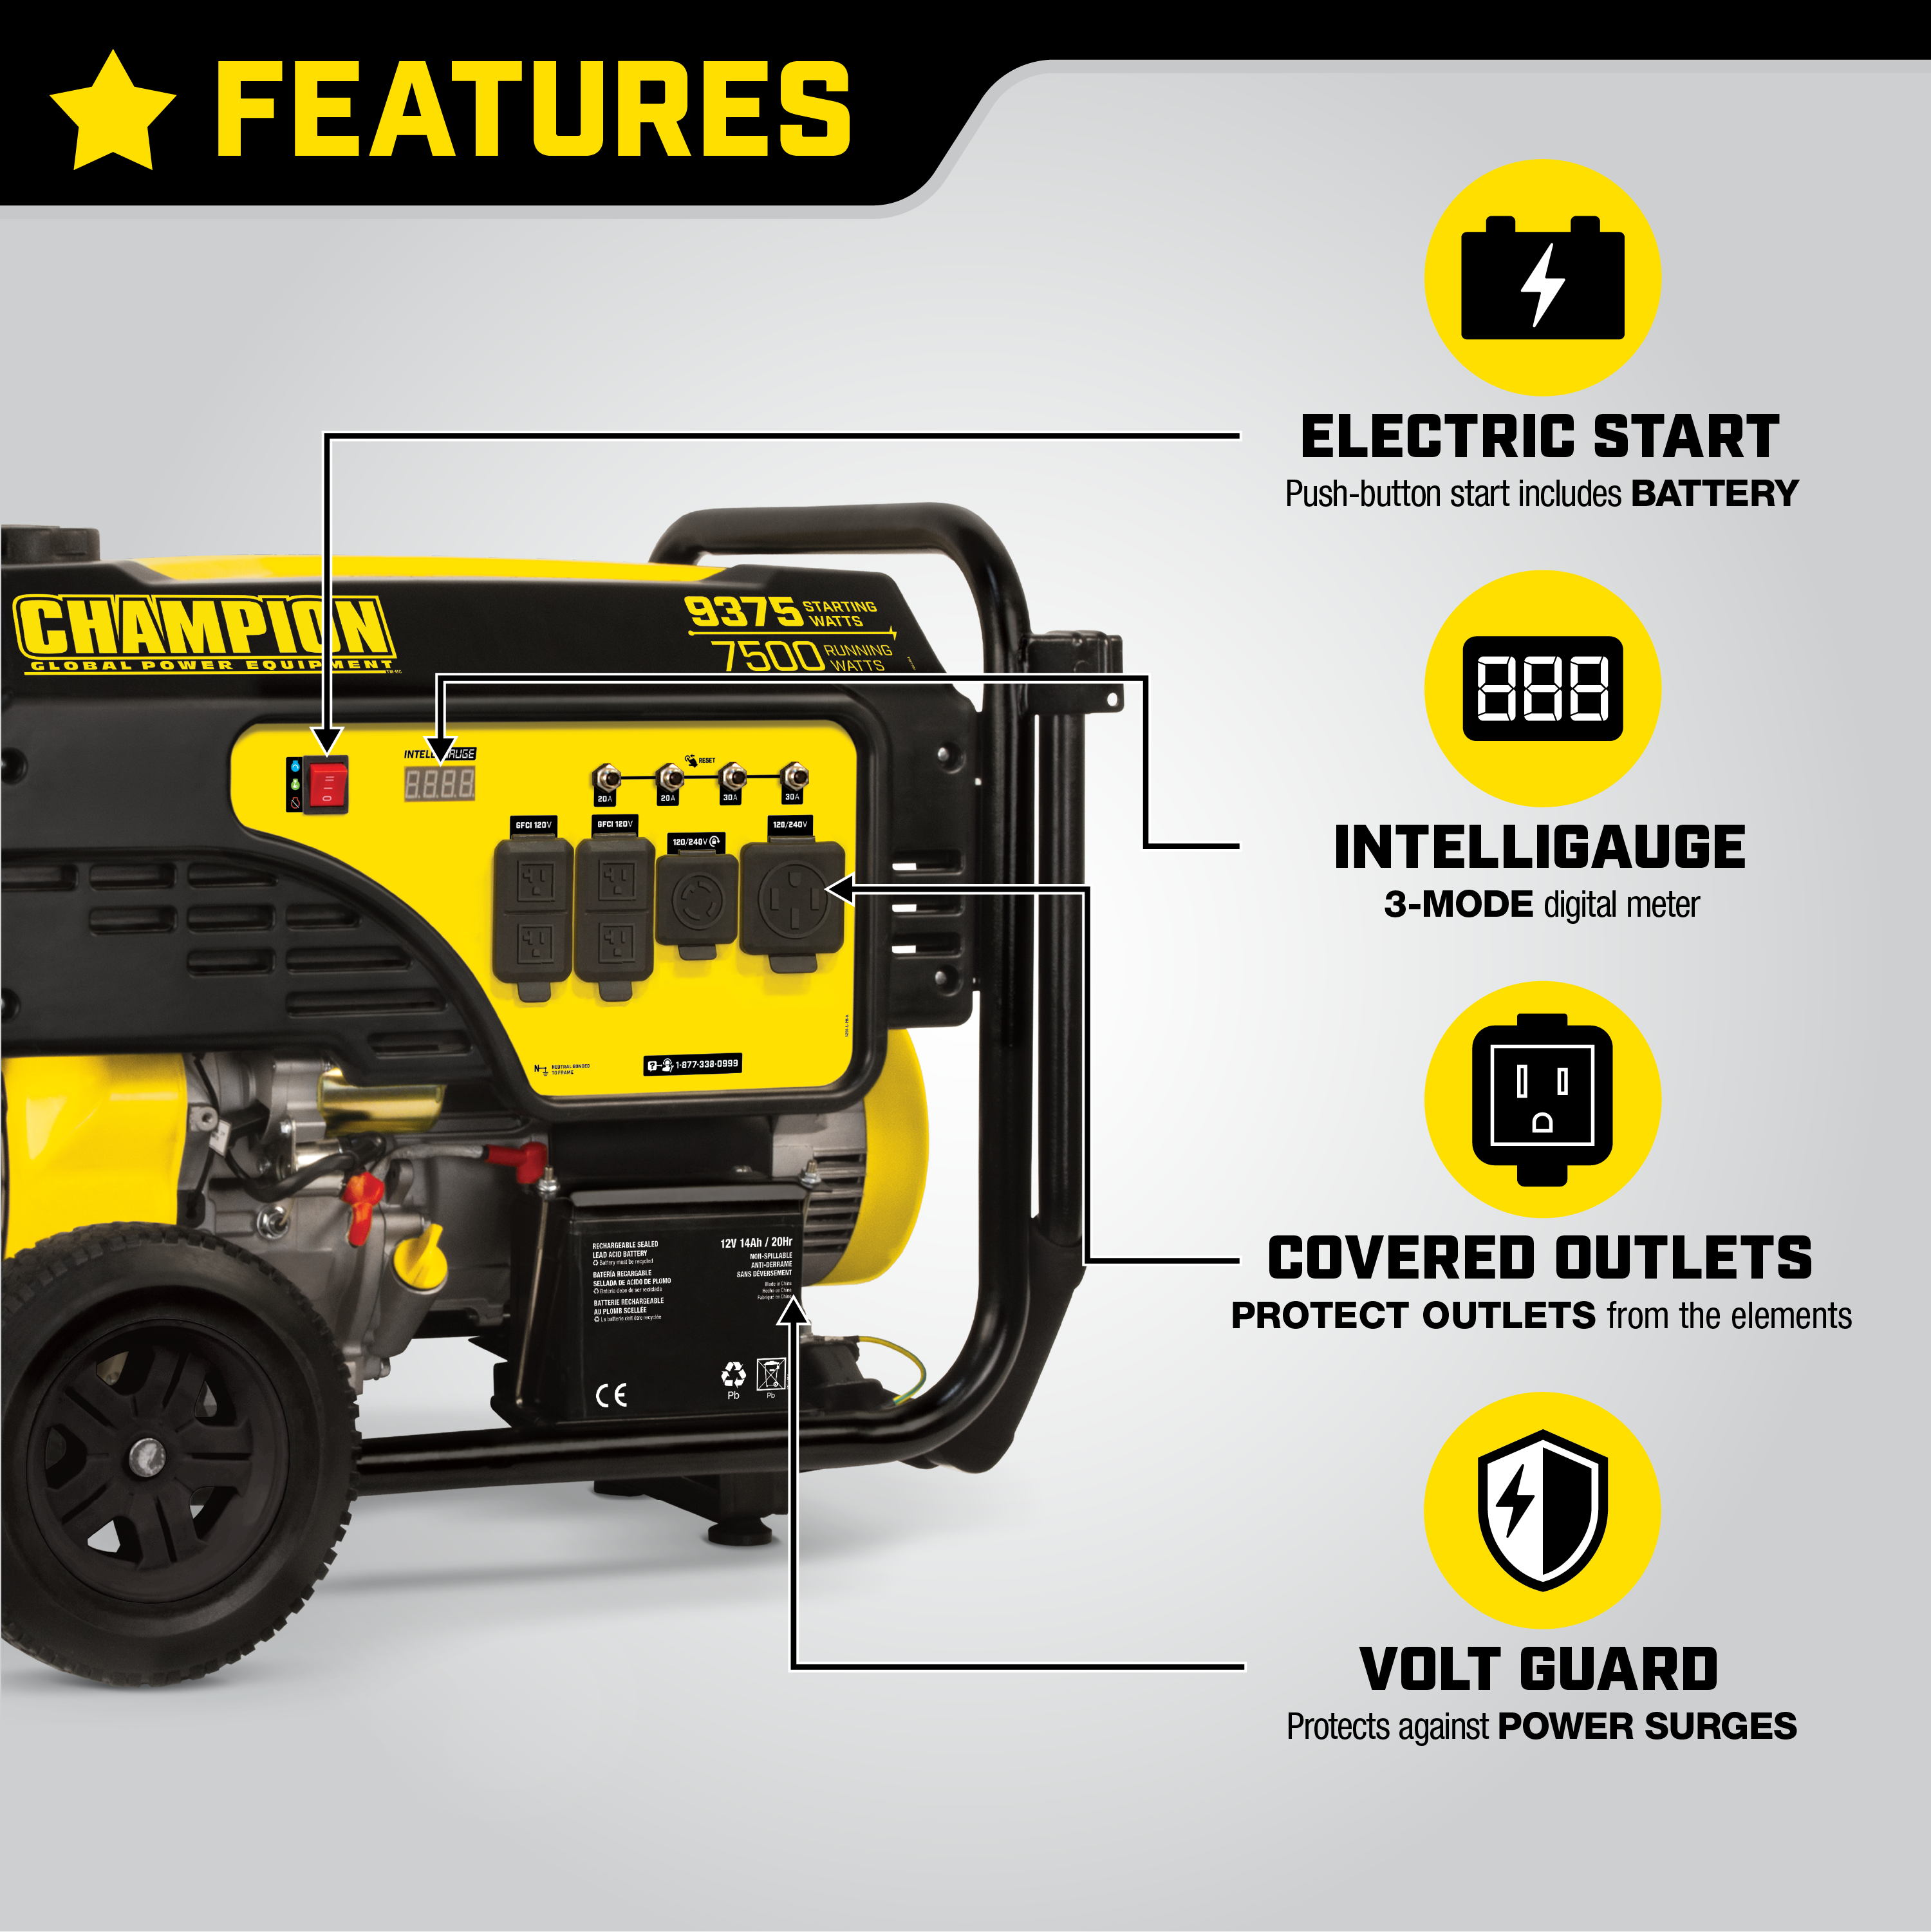 Champion Power Equipment 9375/7500 Watts Portable Generator with Electric Start - image 3 of 10